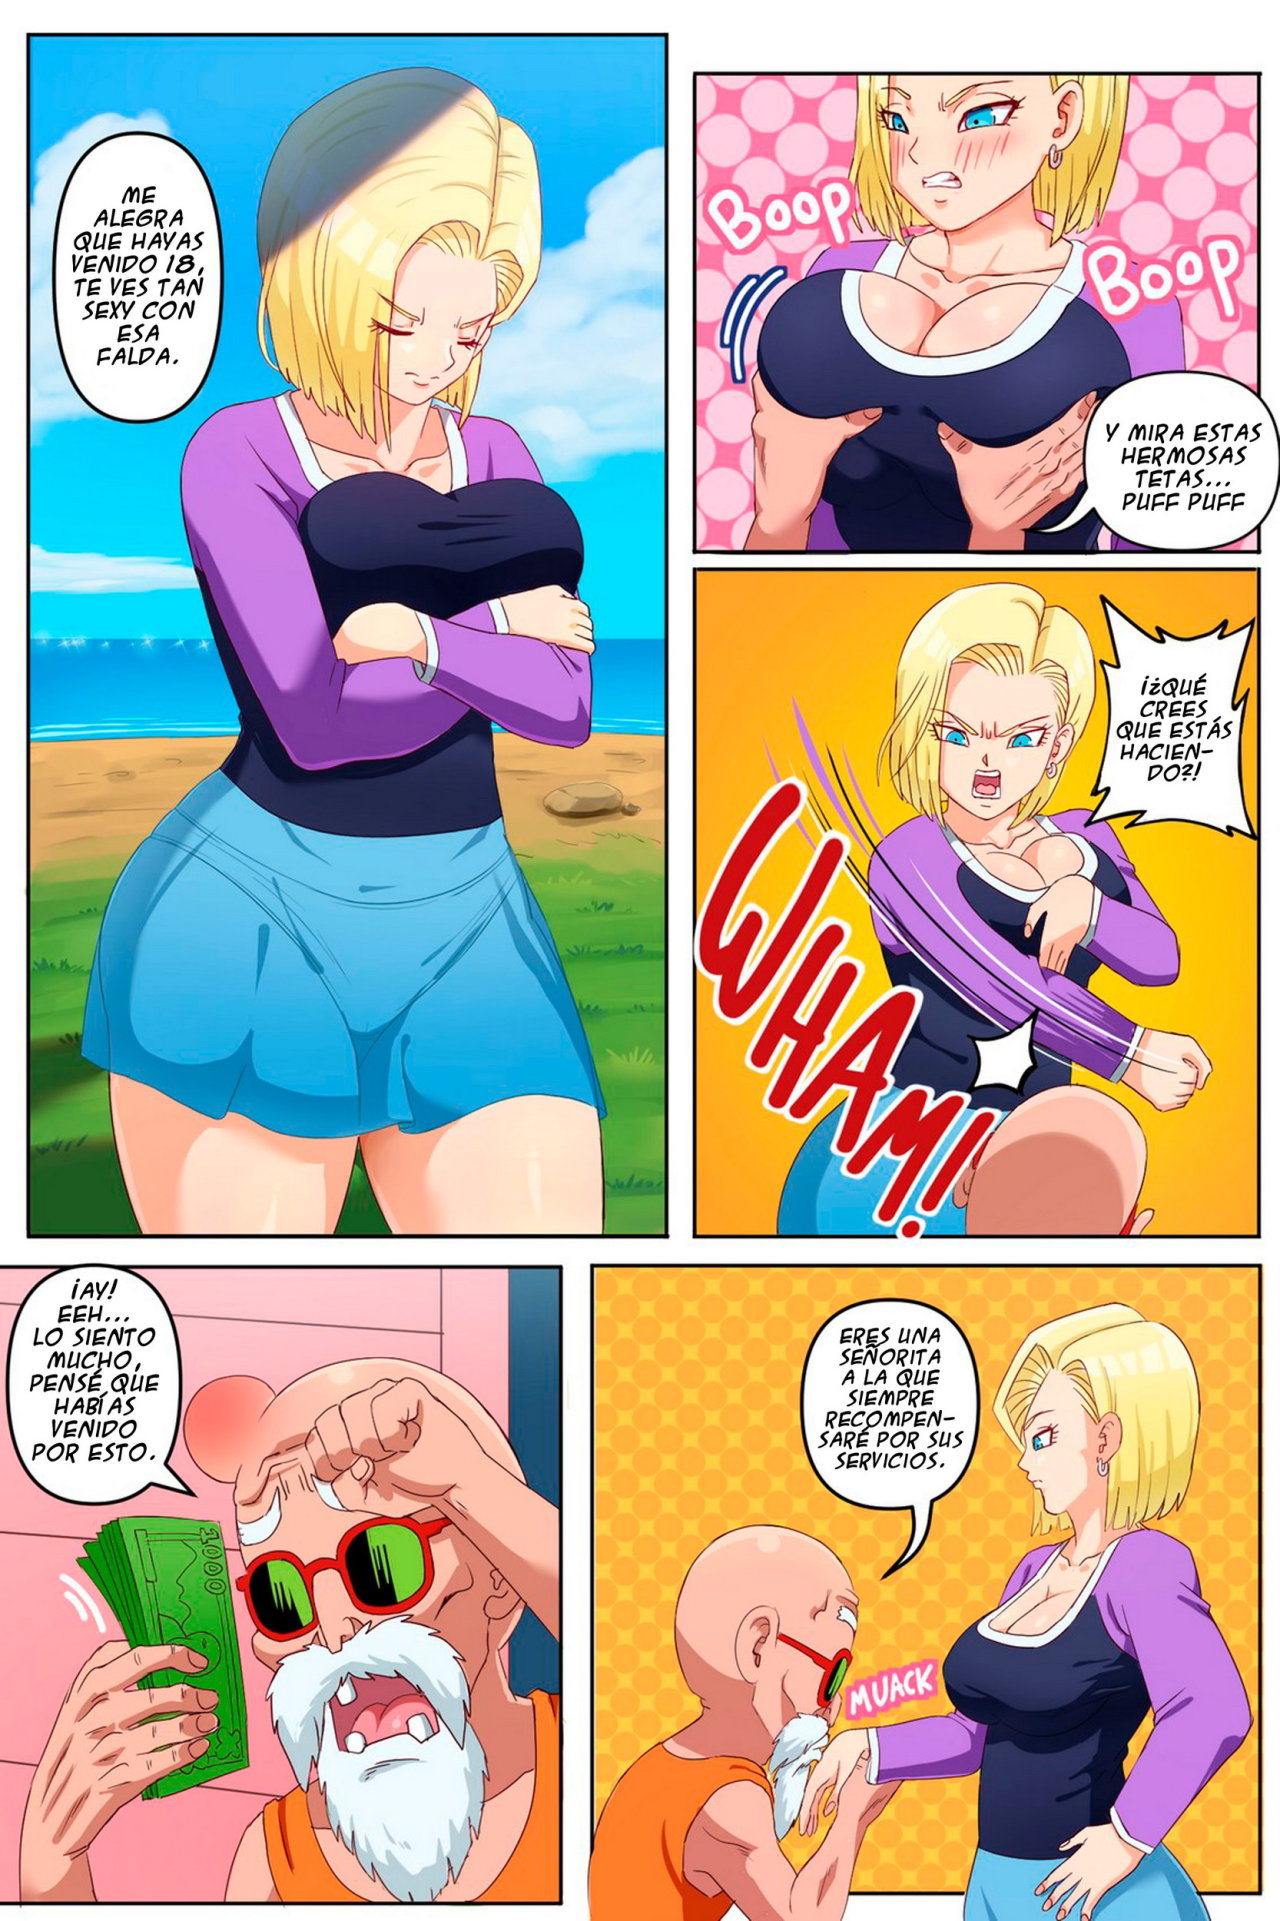 Android 18 NTR 1 - 2